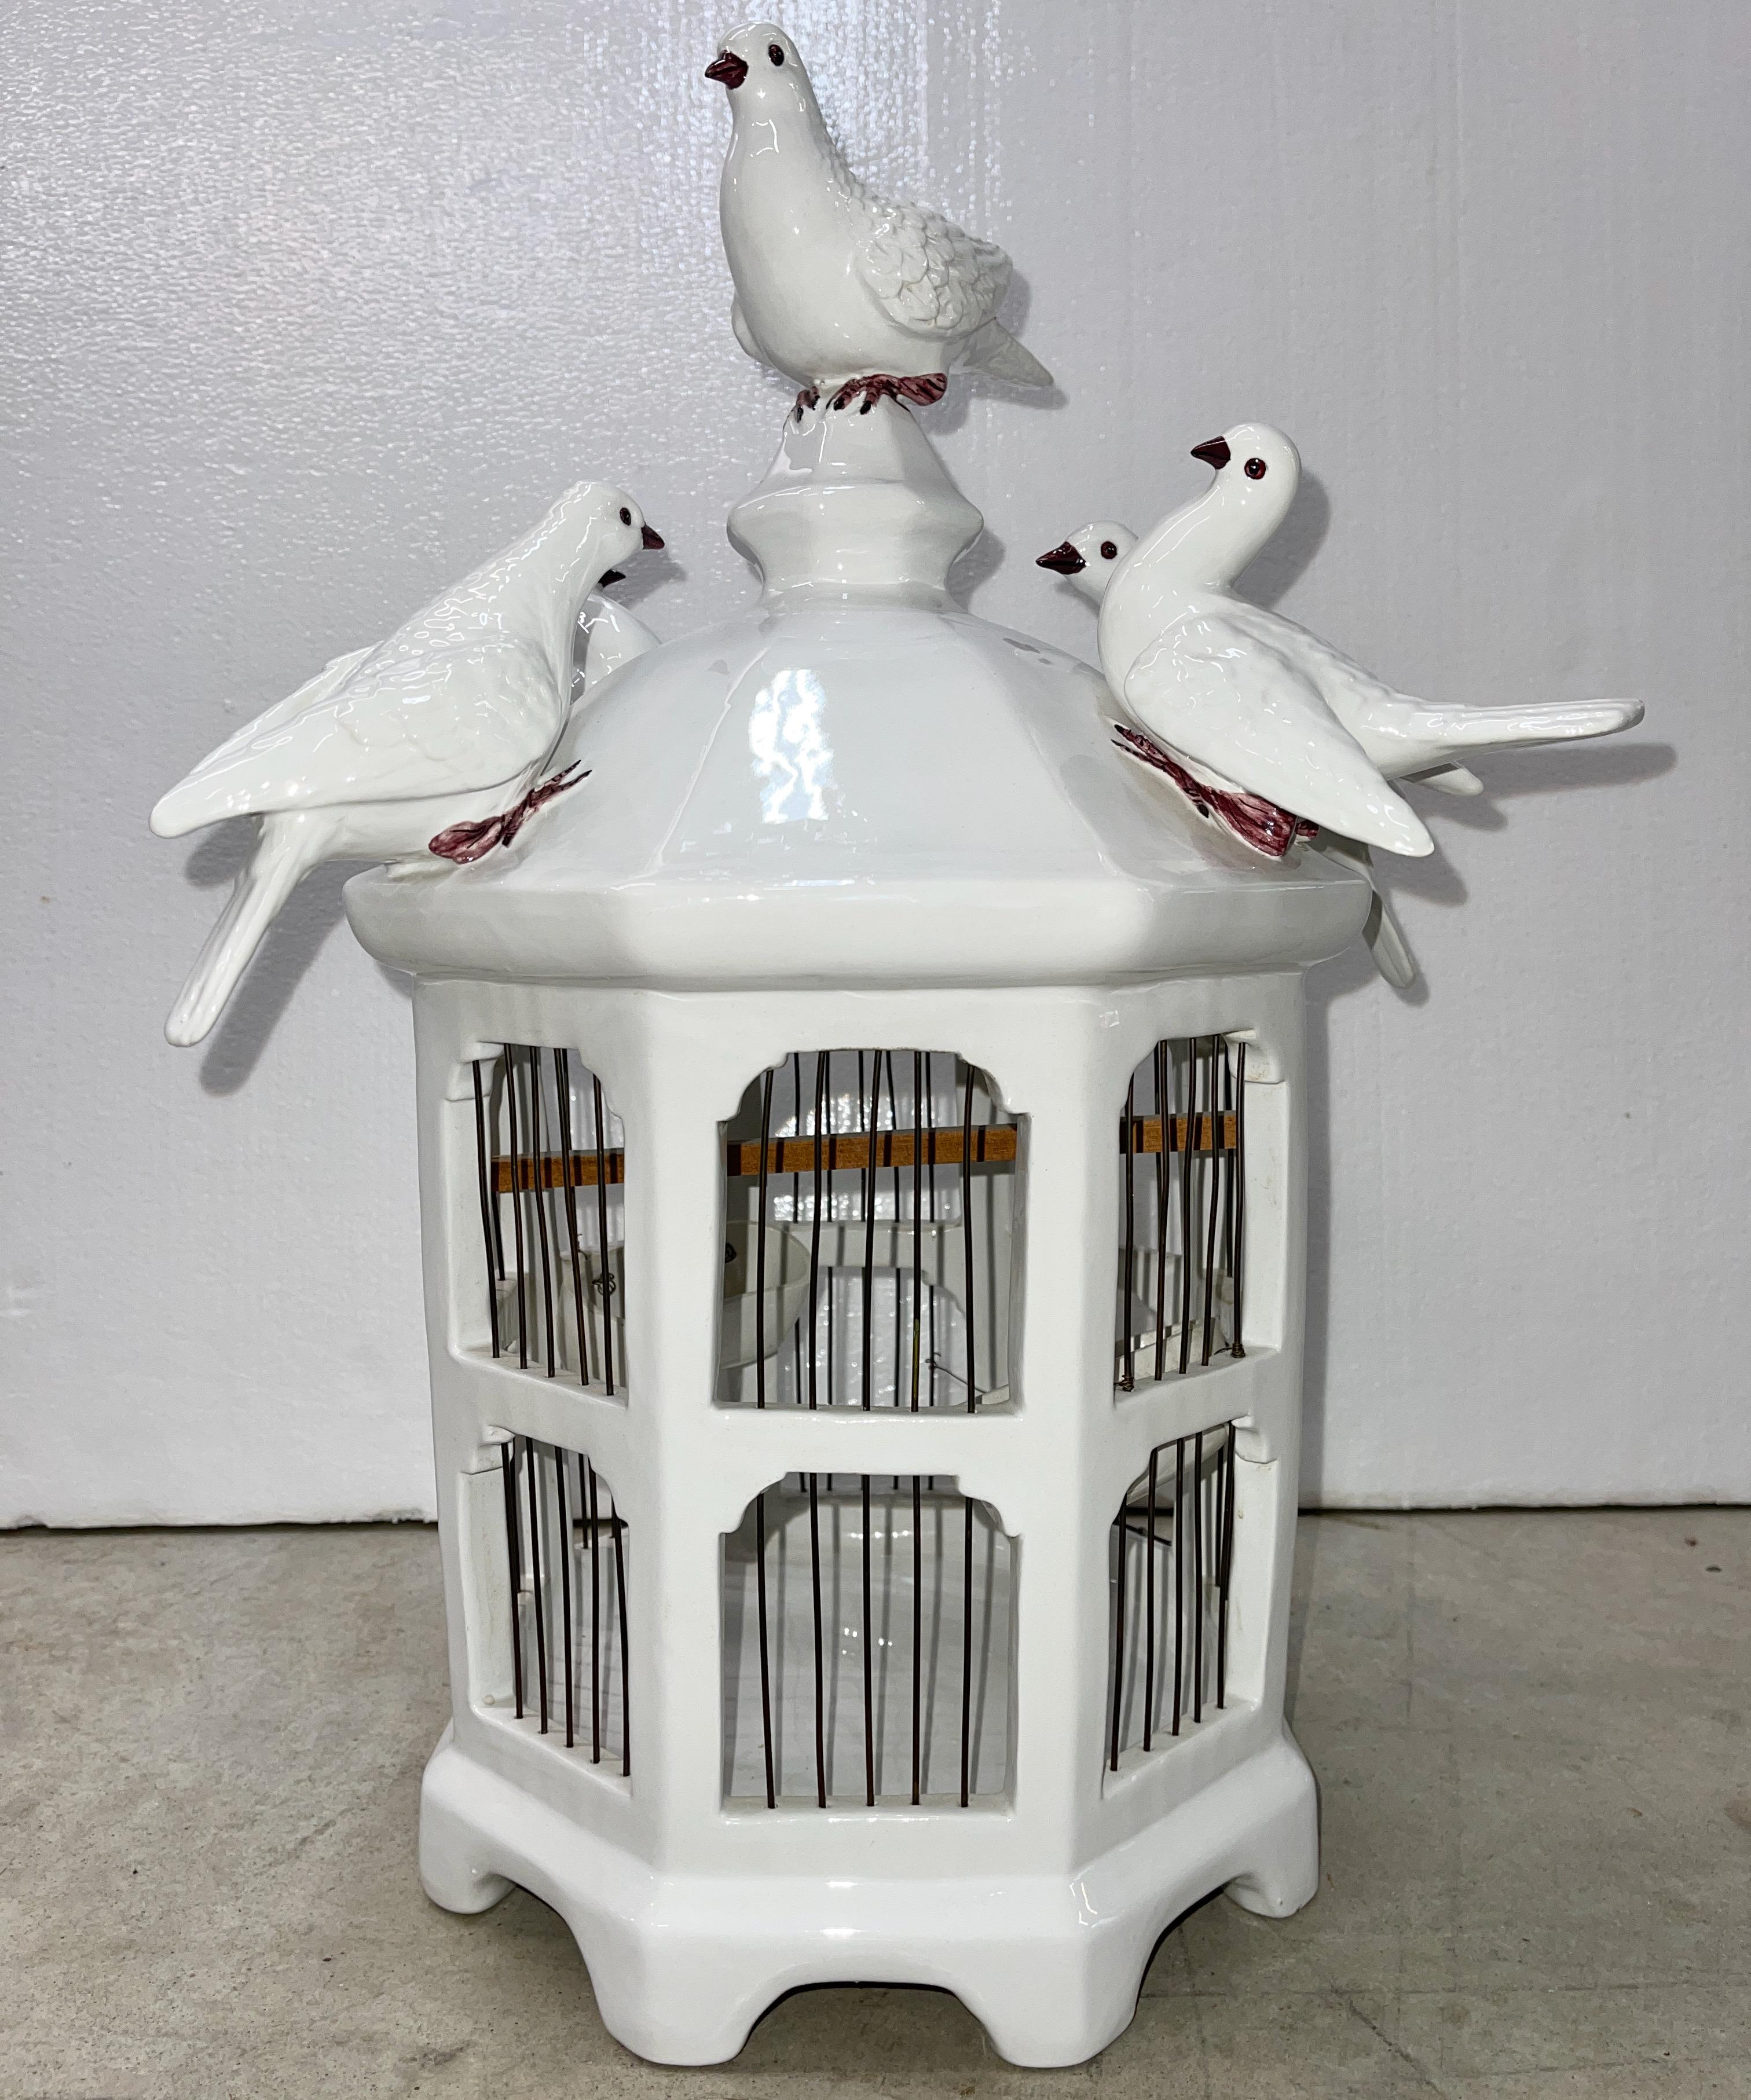 Centerpiece size ceramic and wire sculpture of five white doves seated atop a pagoda shape octagonal bird cage with two tiers of windows with wire 'bars' and two feeders.
Hand made in Italy circa 1970 by Ceramiche Artistiche R. Costa, Via Col di